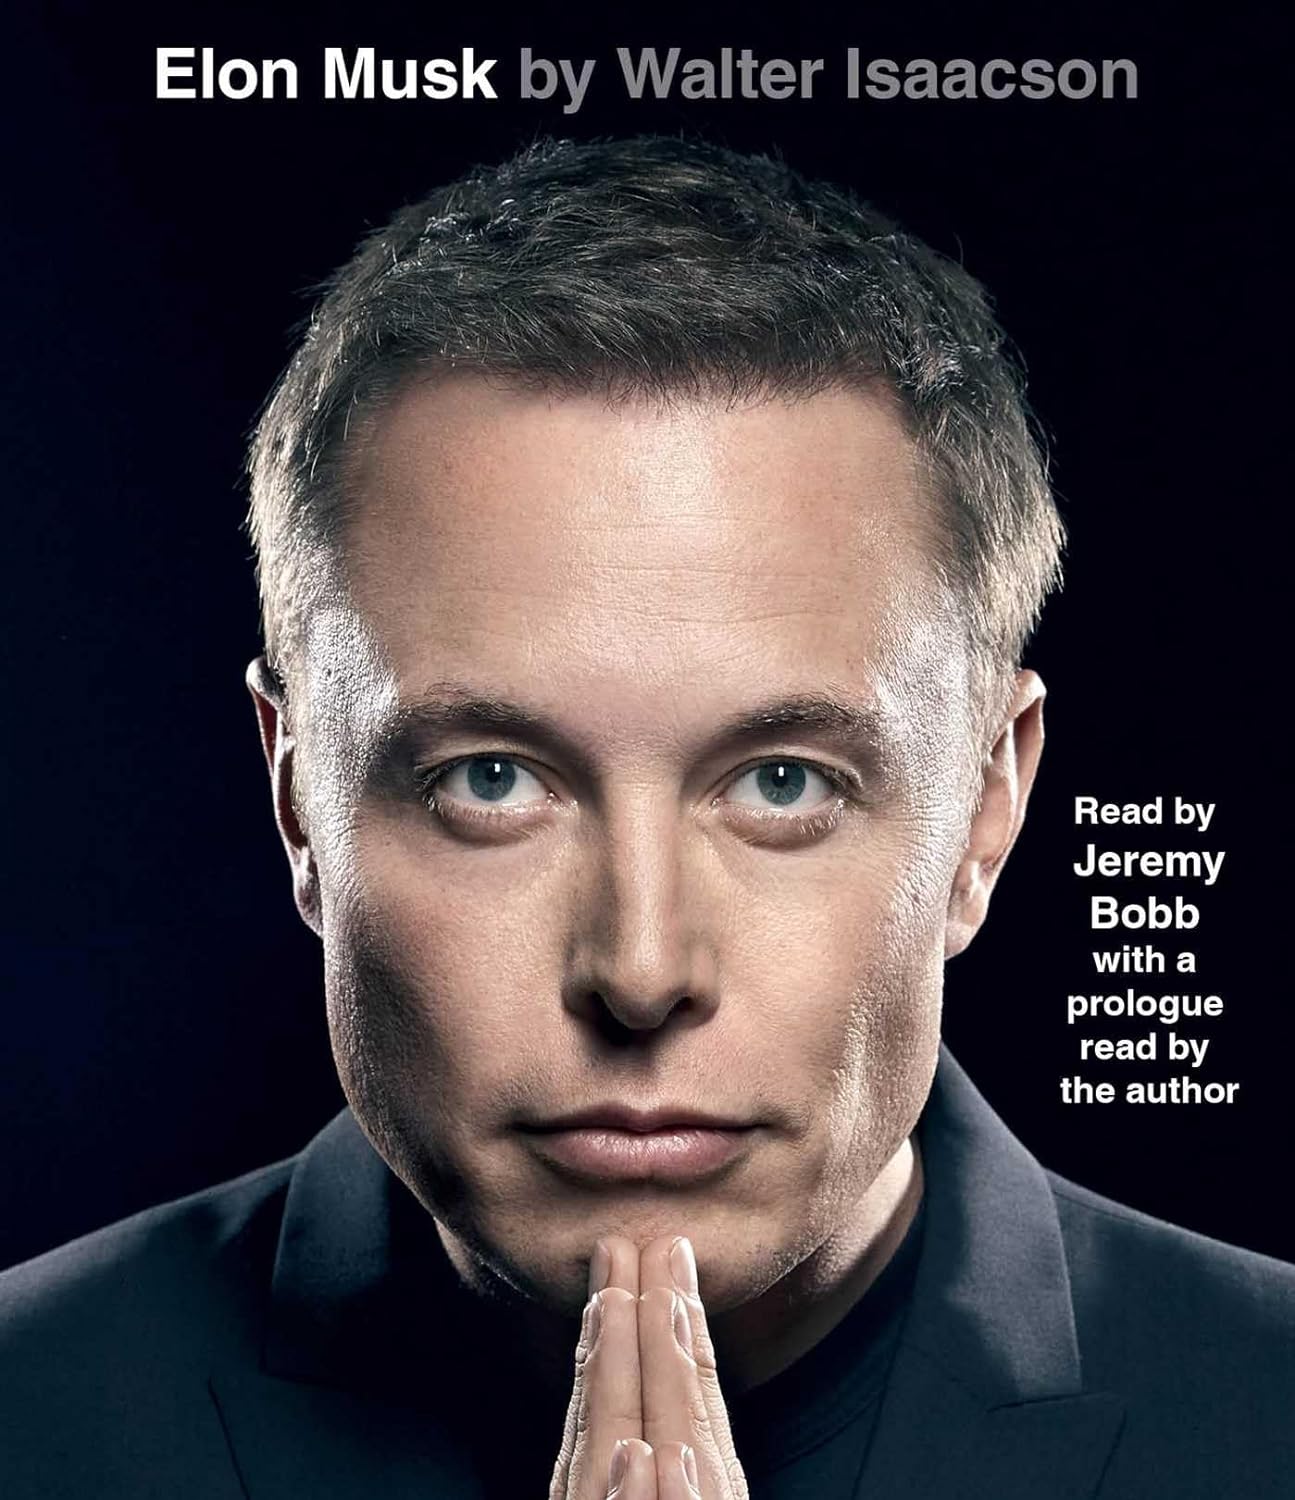 10 New Ideas From the New Musk Biography by Walter Isaacson